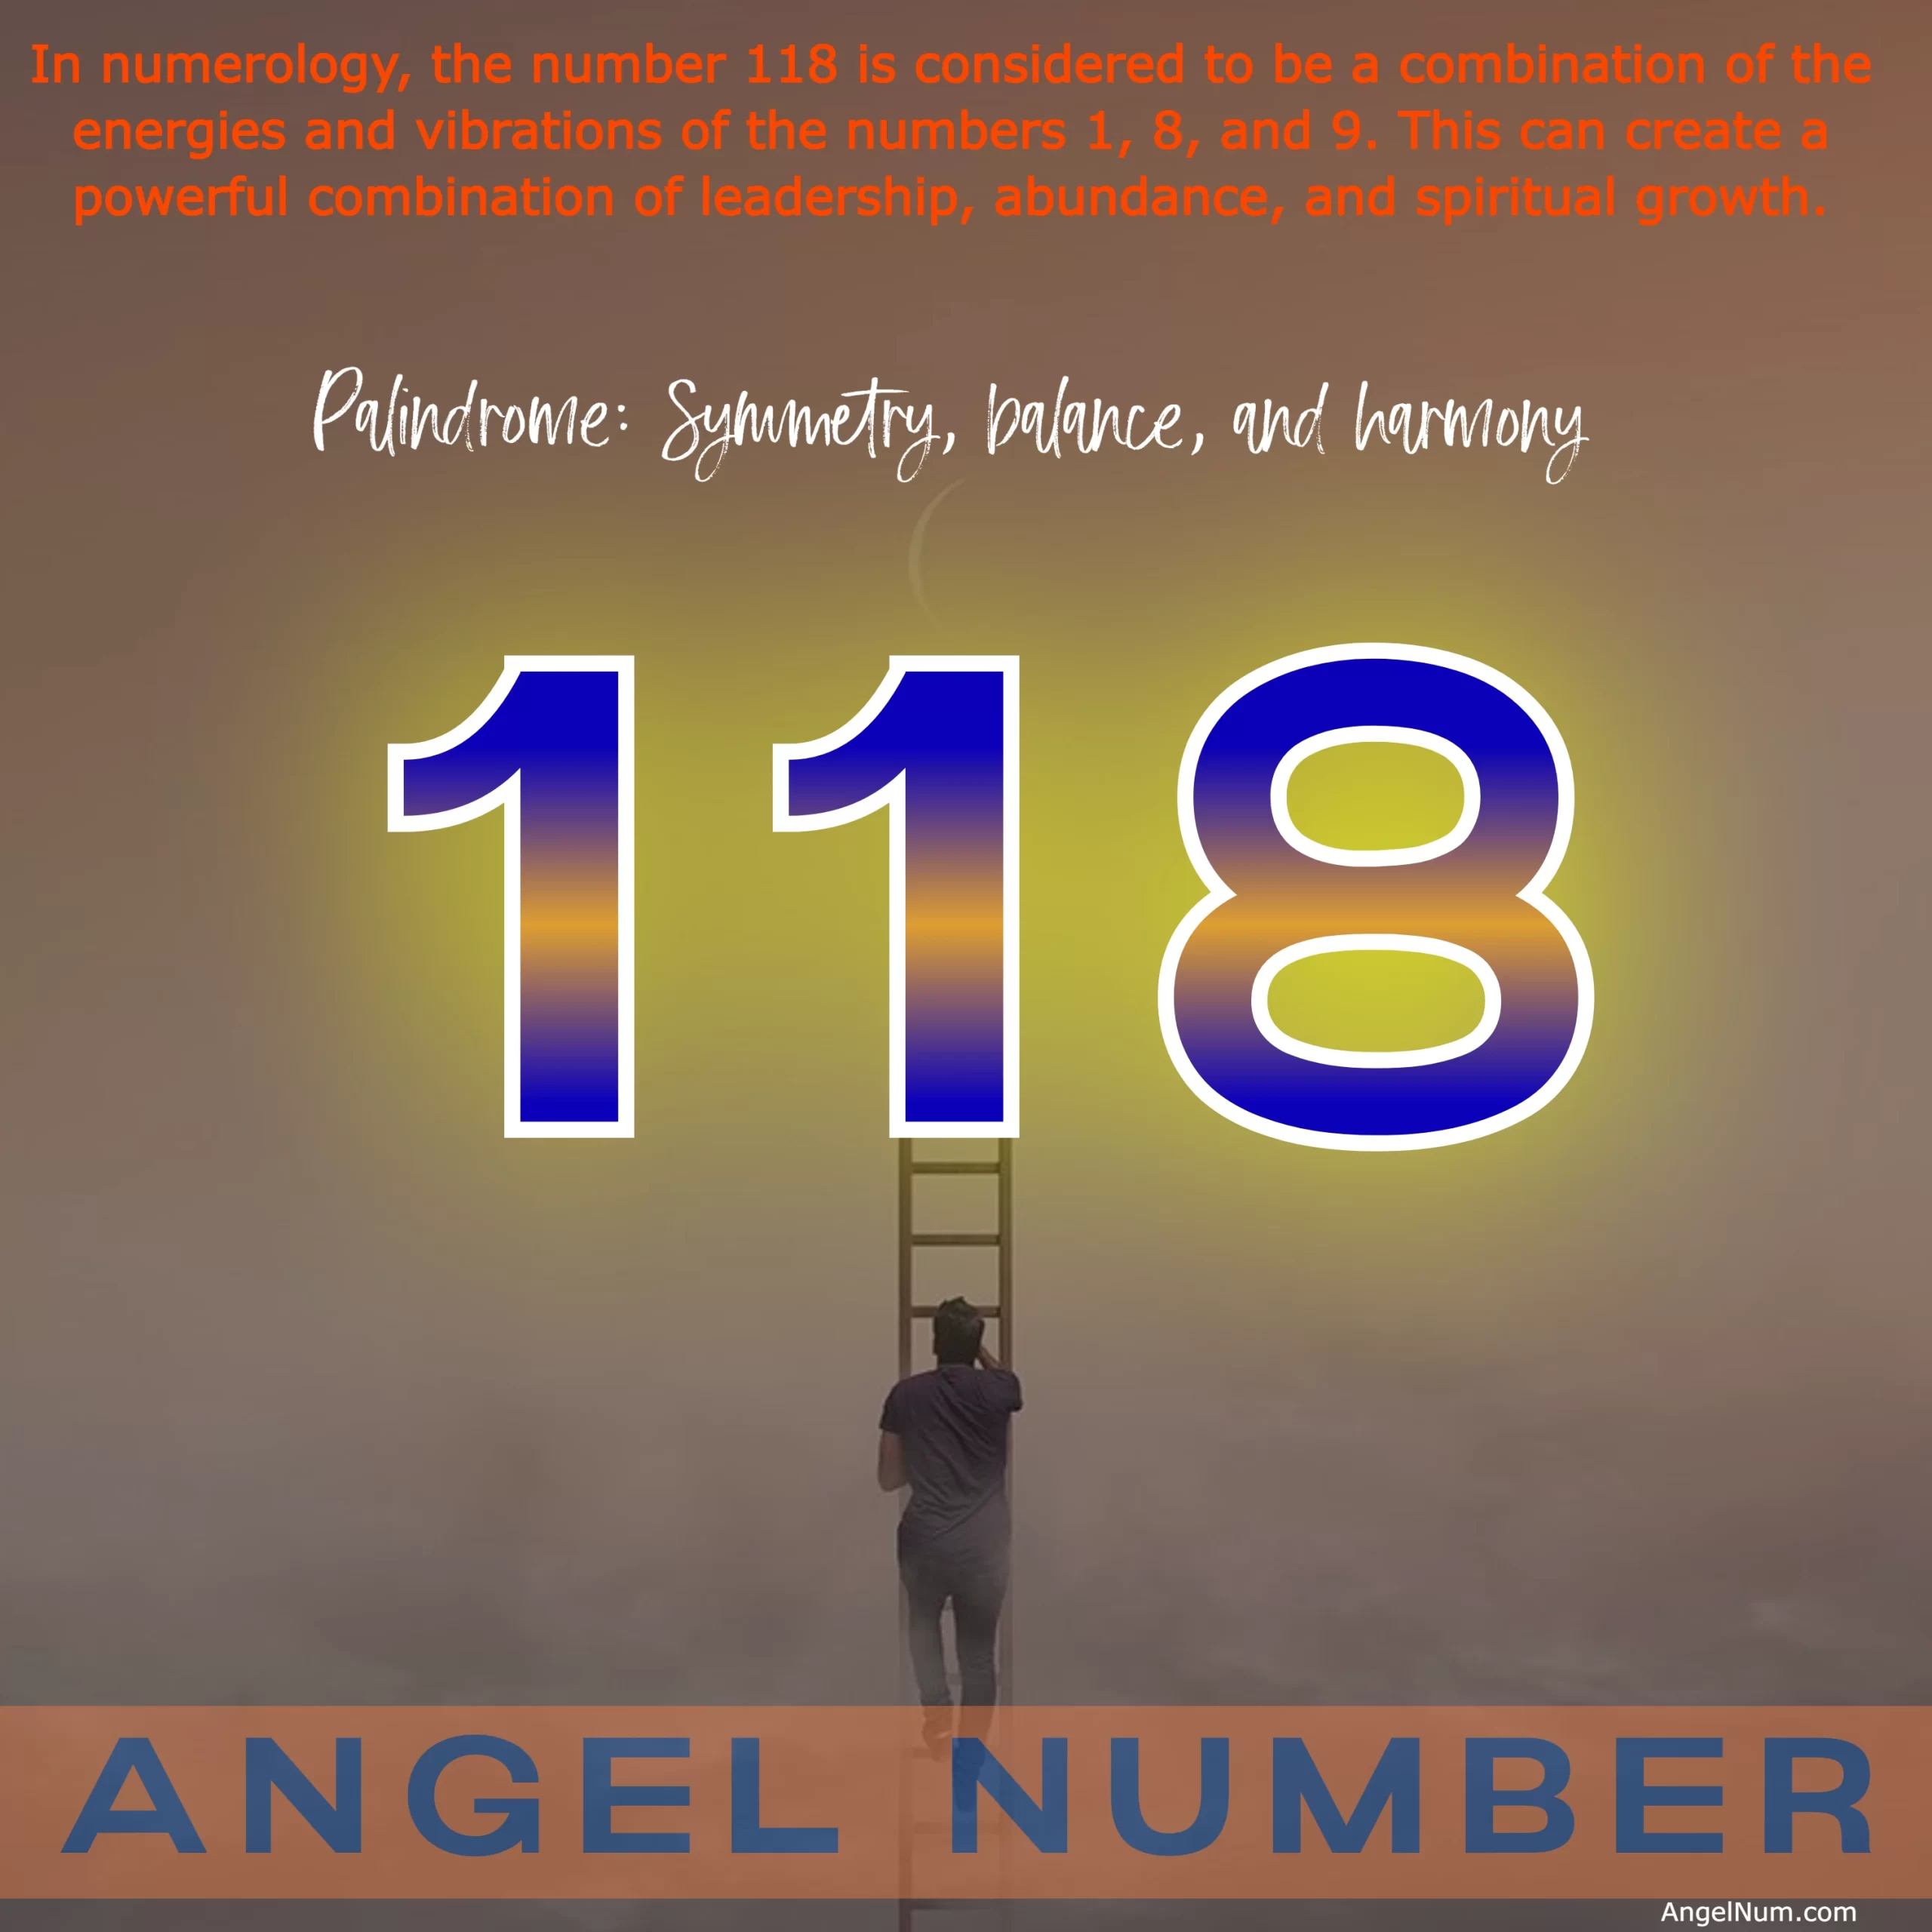 Angel Number 118: Meaning, Symbolism, and Spiritual Significance